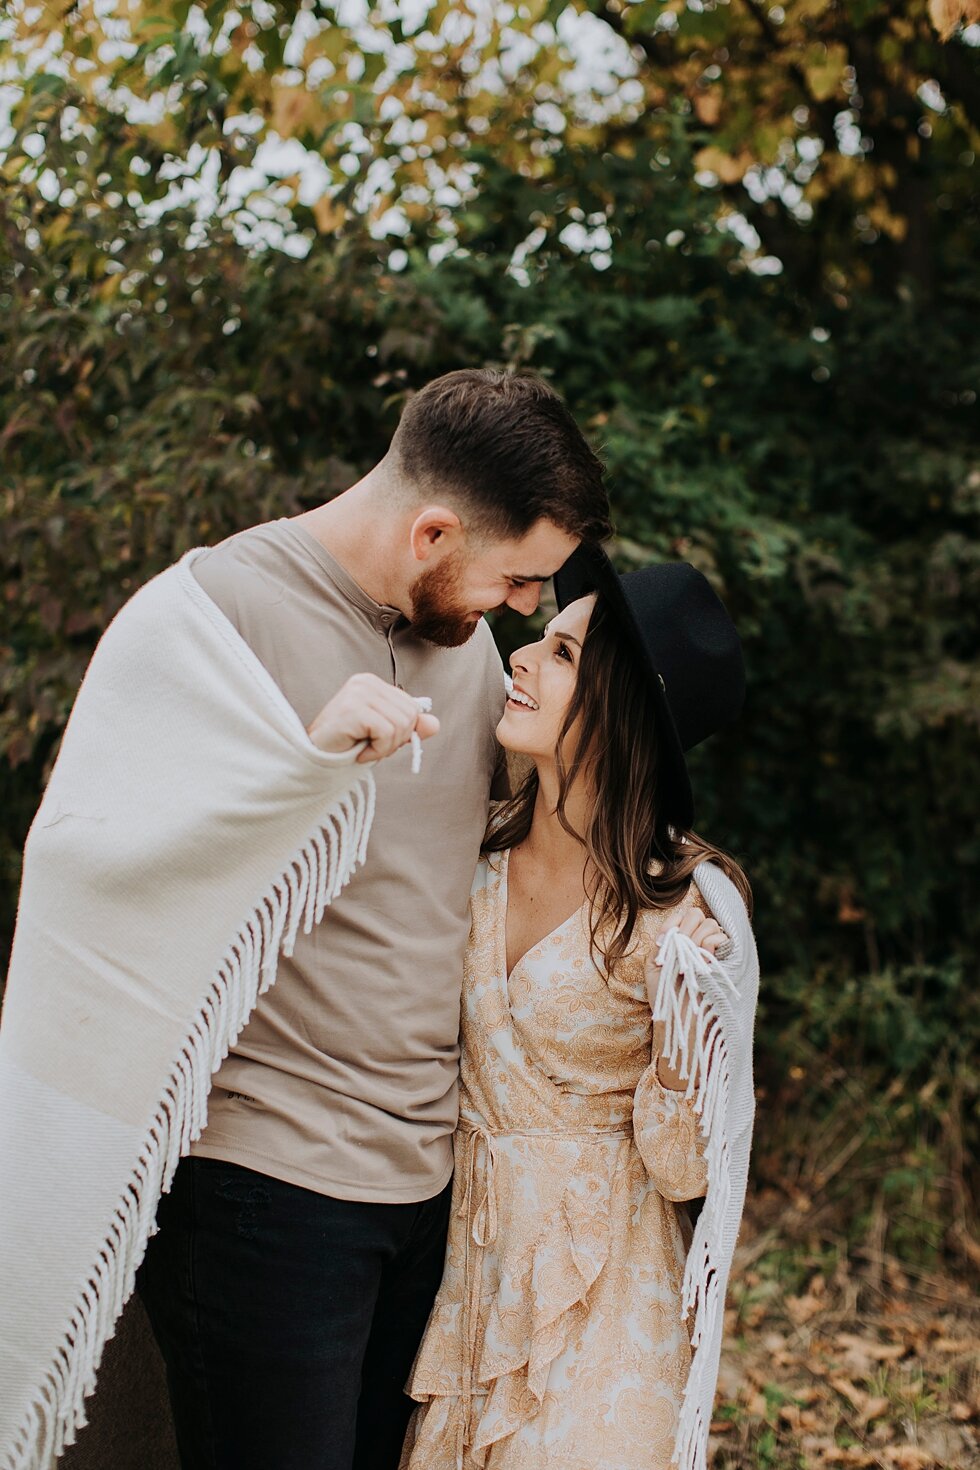  Cute couple snuggle under blanket for engagement photos    #engagementgoals #engagementphotographer #engaged #outdoorengagement #kentuckyphotographer #indianaphotographer #louisvillephotographer #engagementphotos #savethedatephotos #savethedates #en